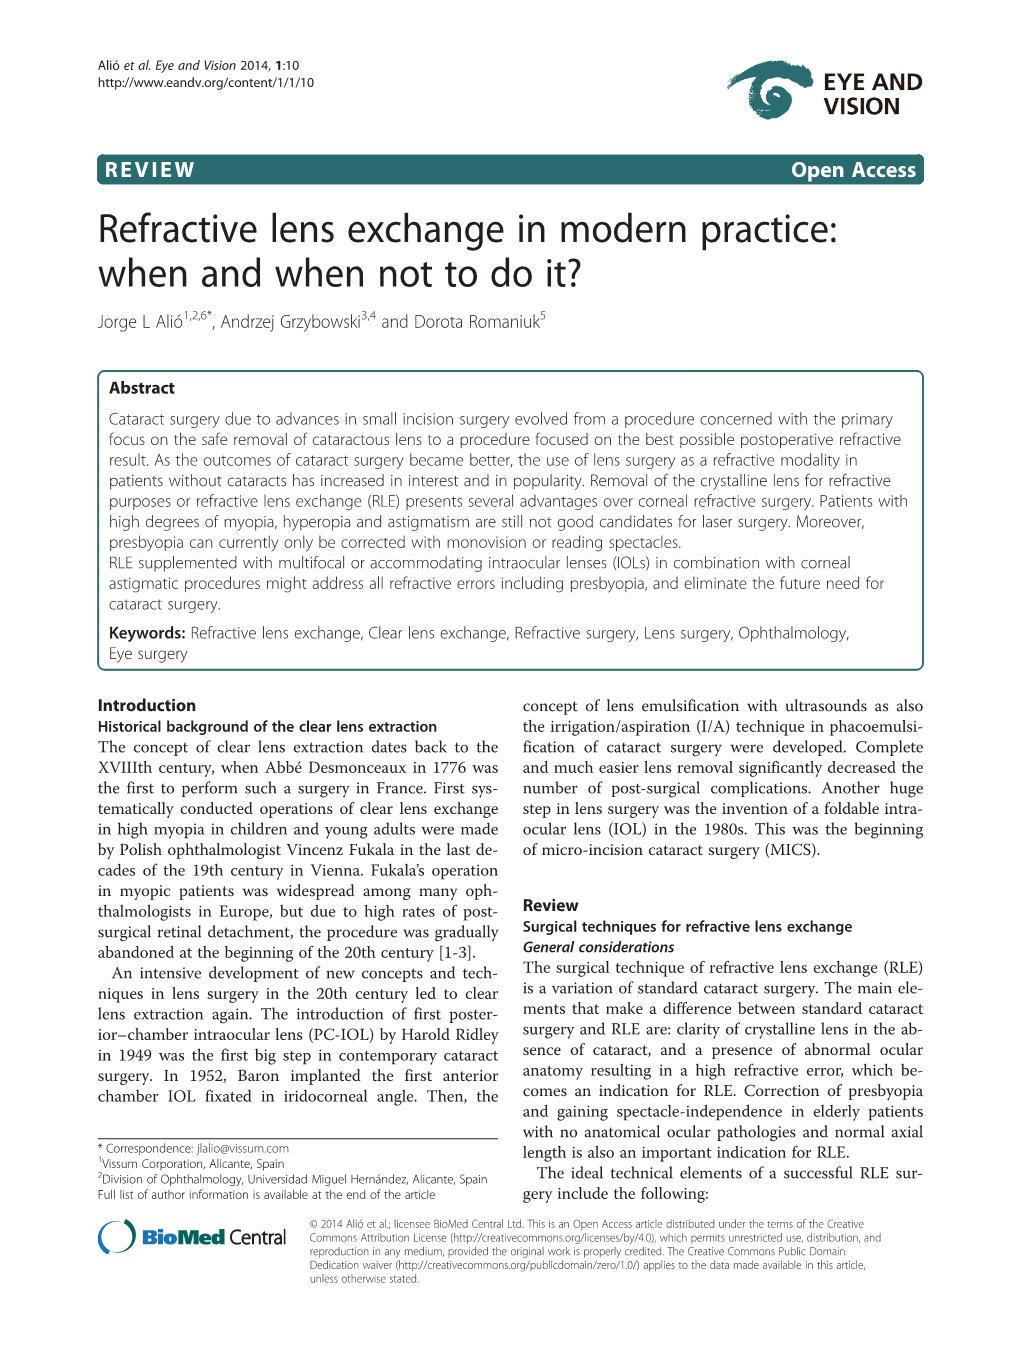 Refractive Lens Exchange in Modern Practice: When and When Not to Do It? Jorge L Alió1,2,6*, Andrzej Grzybowski3,4 and Dorota Romaniuk5